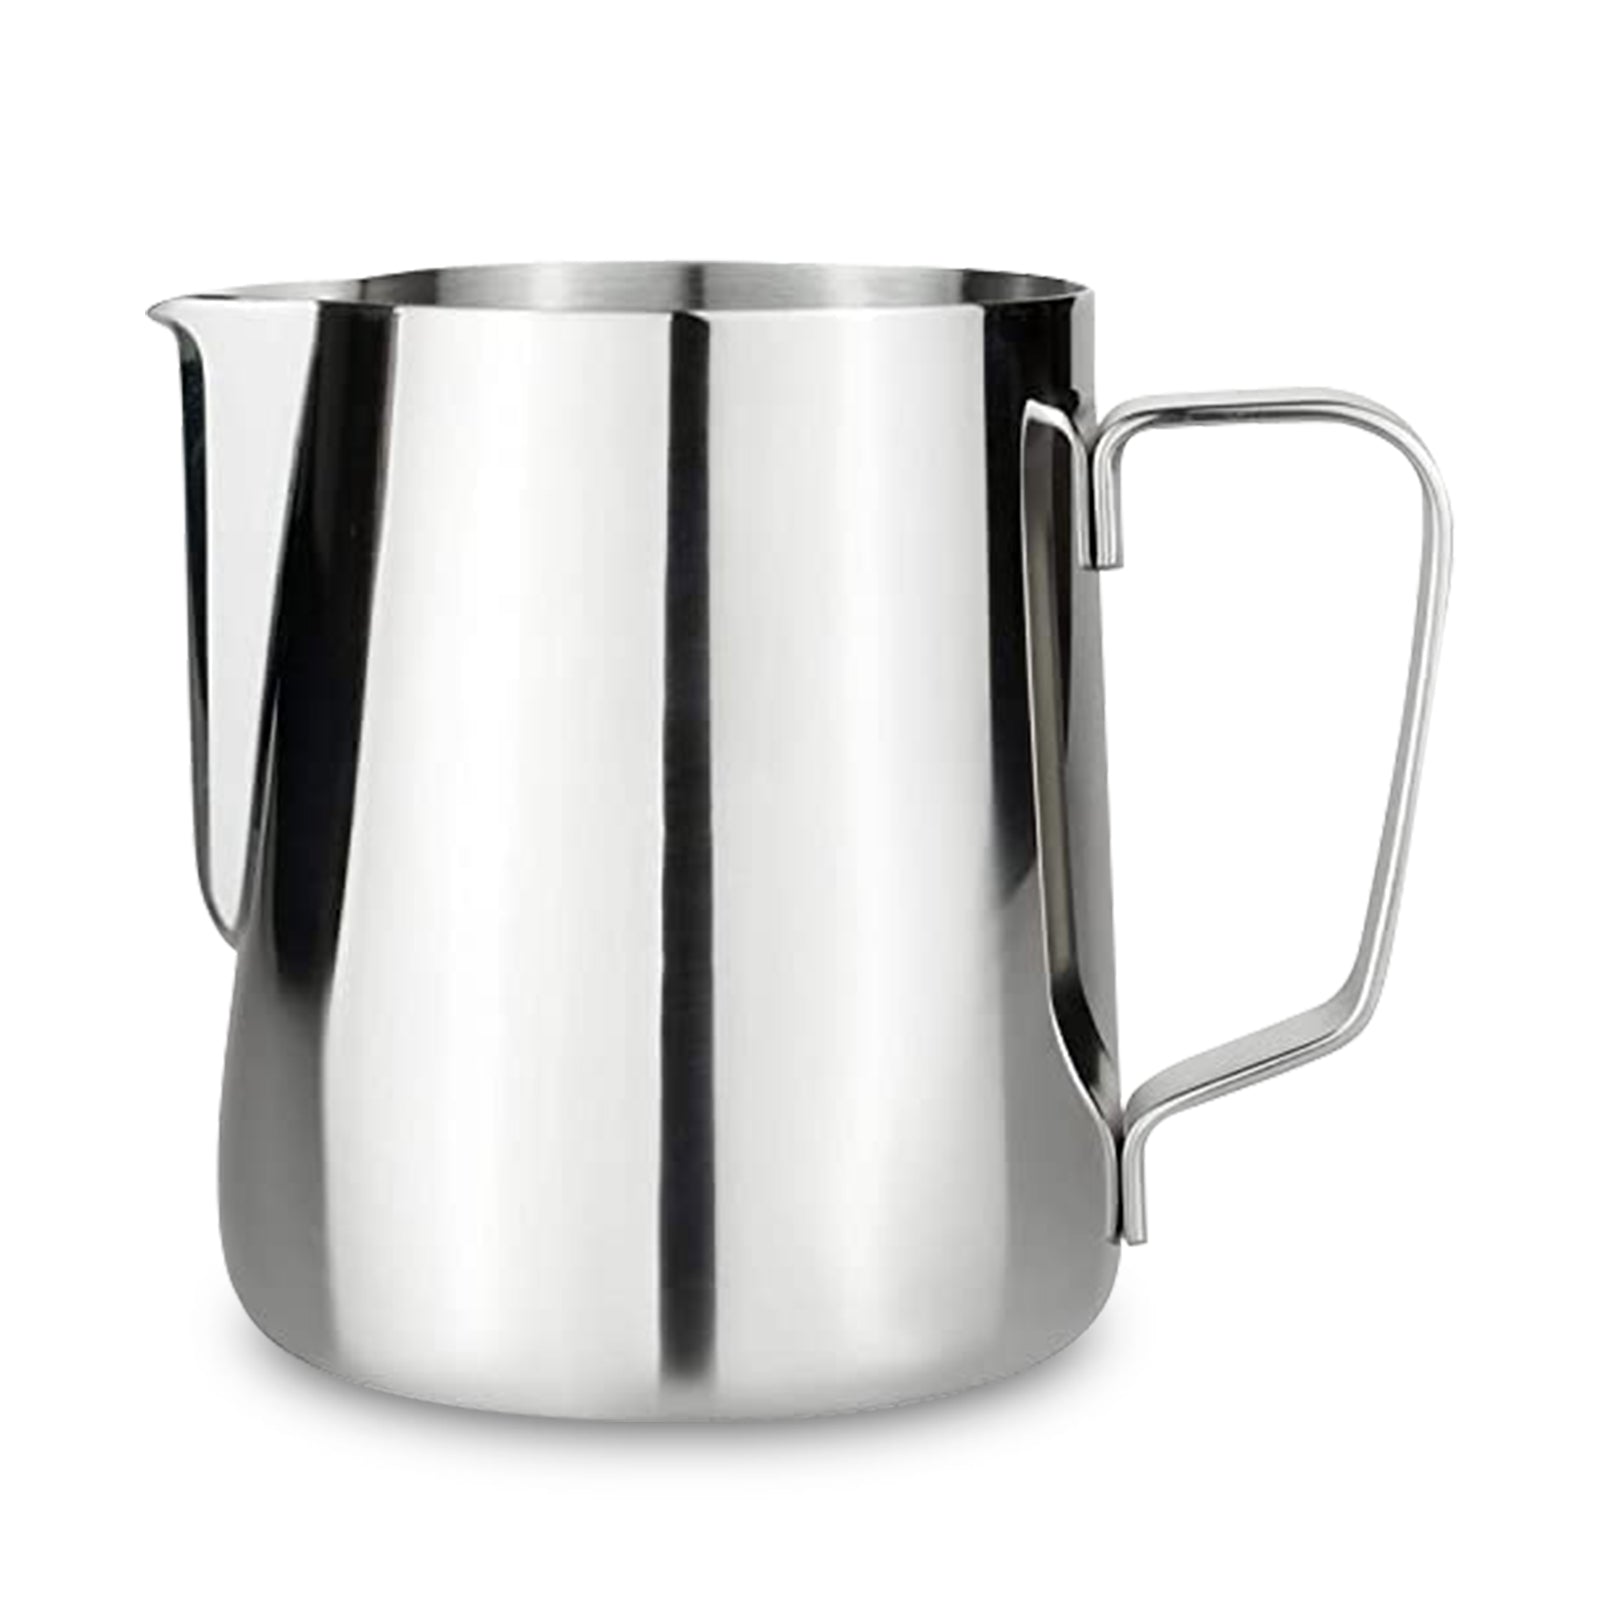 Casara Milk Frother Dishwasher Safe Jug, Large Capcity Up to 800ML, SUS 304  Stainless Jug With Lid And Dishwasher Whisk Rack, Professional Milk